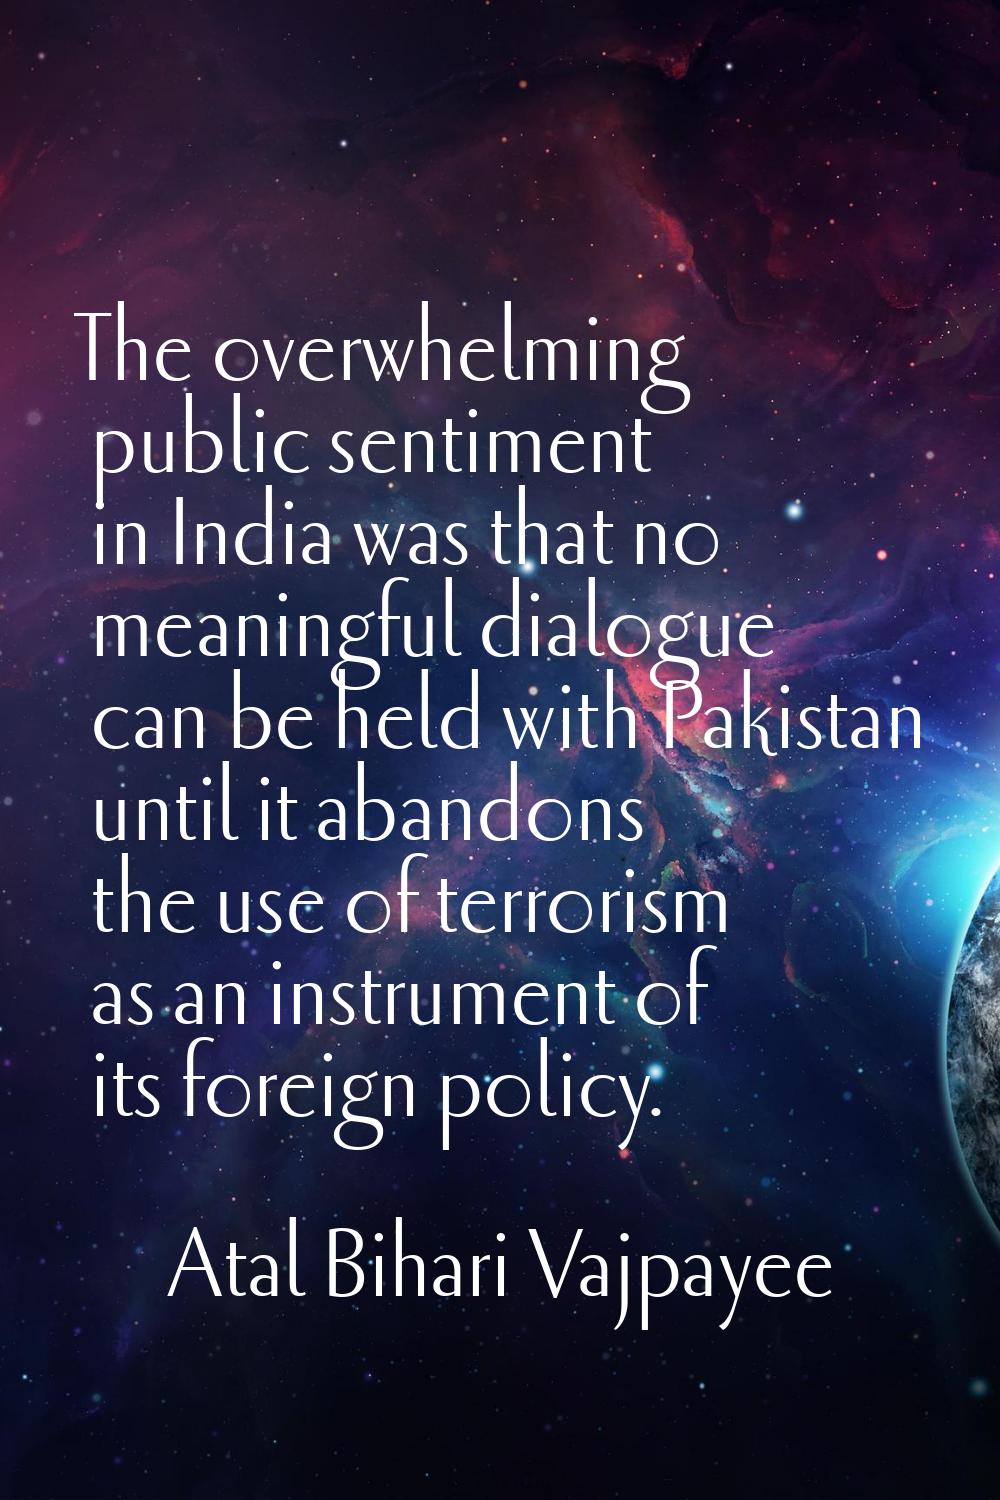 The overwhelming public sentiment in India was that no meaningful dialogue can be held with Pakista